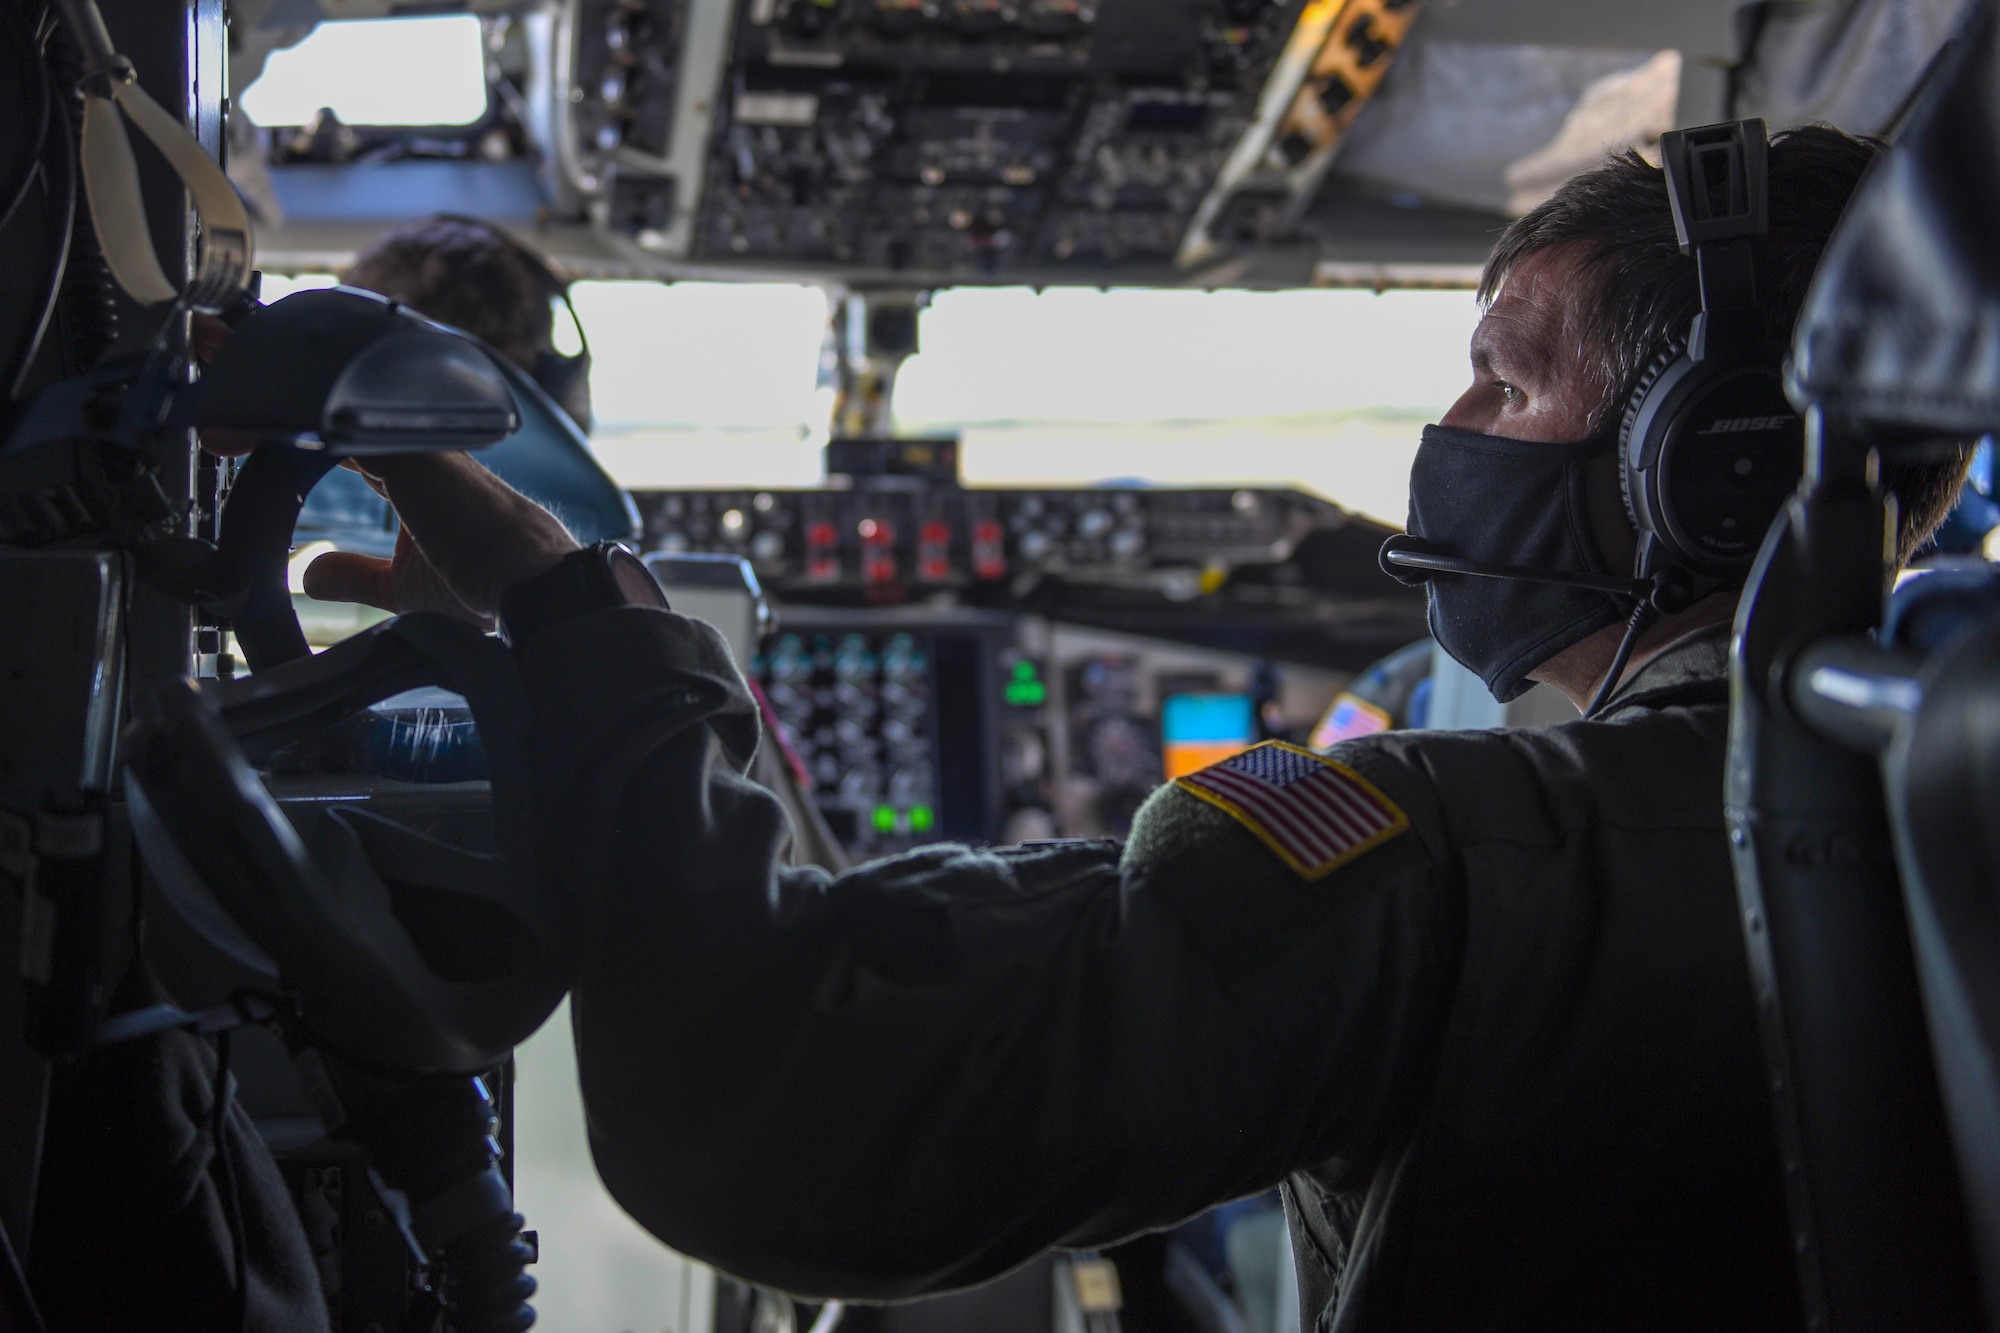 U.S. Air Force Senior Master Sgt. Ryan Clauss, a 93rd Air Refueling Squadron instructor boom operator, prepares for take off at Eielson Air Force Base, Alaska, May 21, 2020. During the flight, Clauss refueled a B-1B Lancer to support a long-range, long-duration Bomber Task Force mission over Alaska and near Japan. In Alaska, the B-1s were joined by F-22s and F-16s out of the 3rd Wing at Joint Base Elmendorf-Richardson, to conduct a large force employment exercise in the Joint Pacific Alaska Range Complex. (U.S. Air Force photo by Airman 1st Class Aaron Larue Guerrisky)